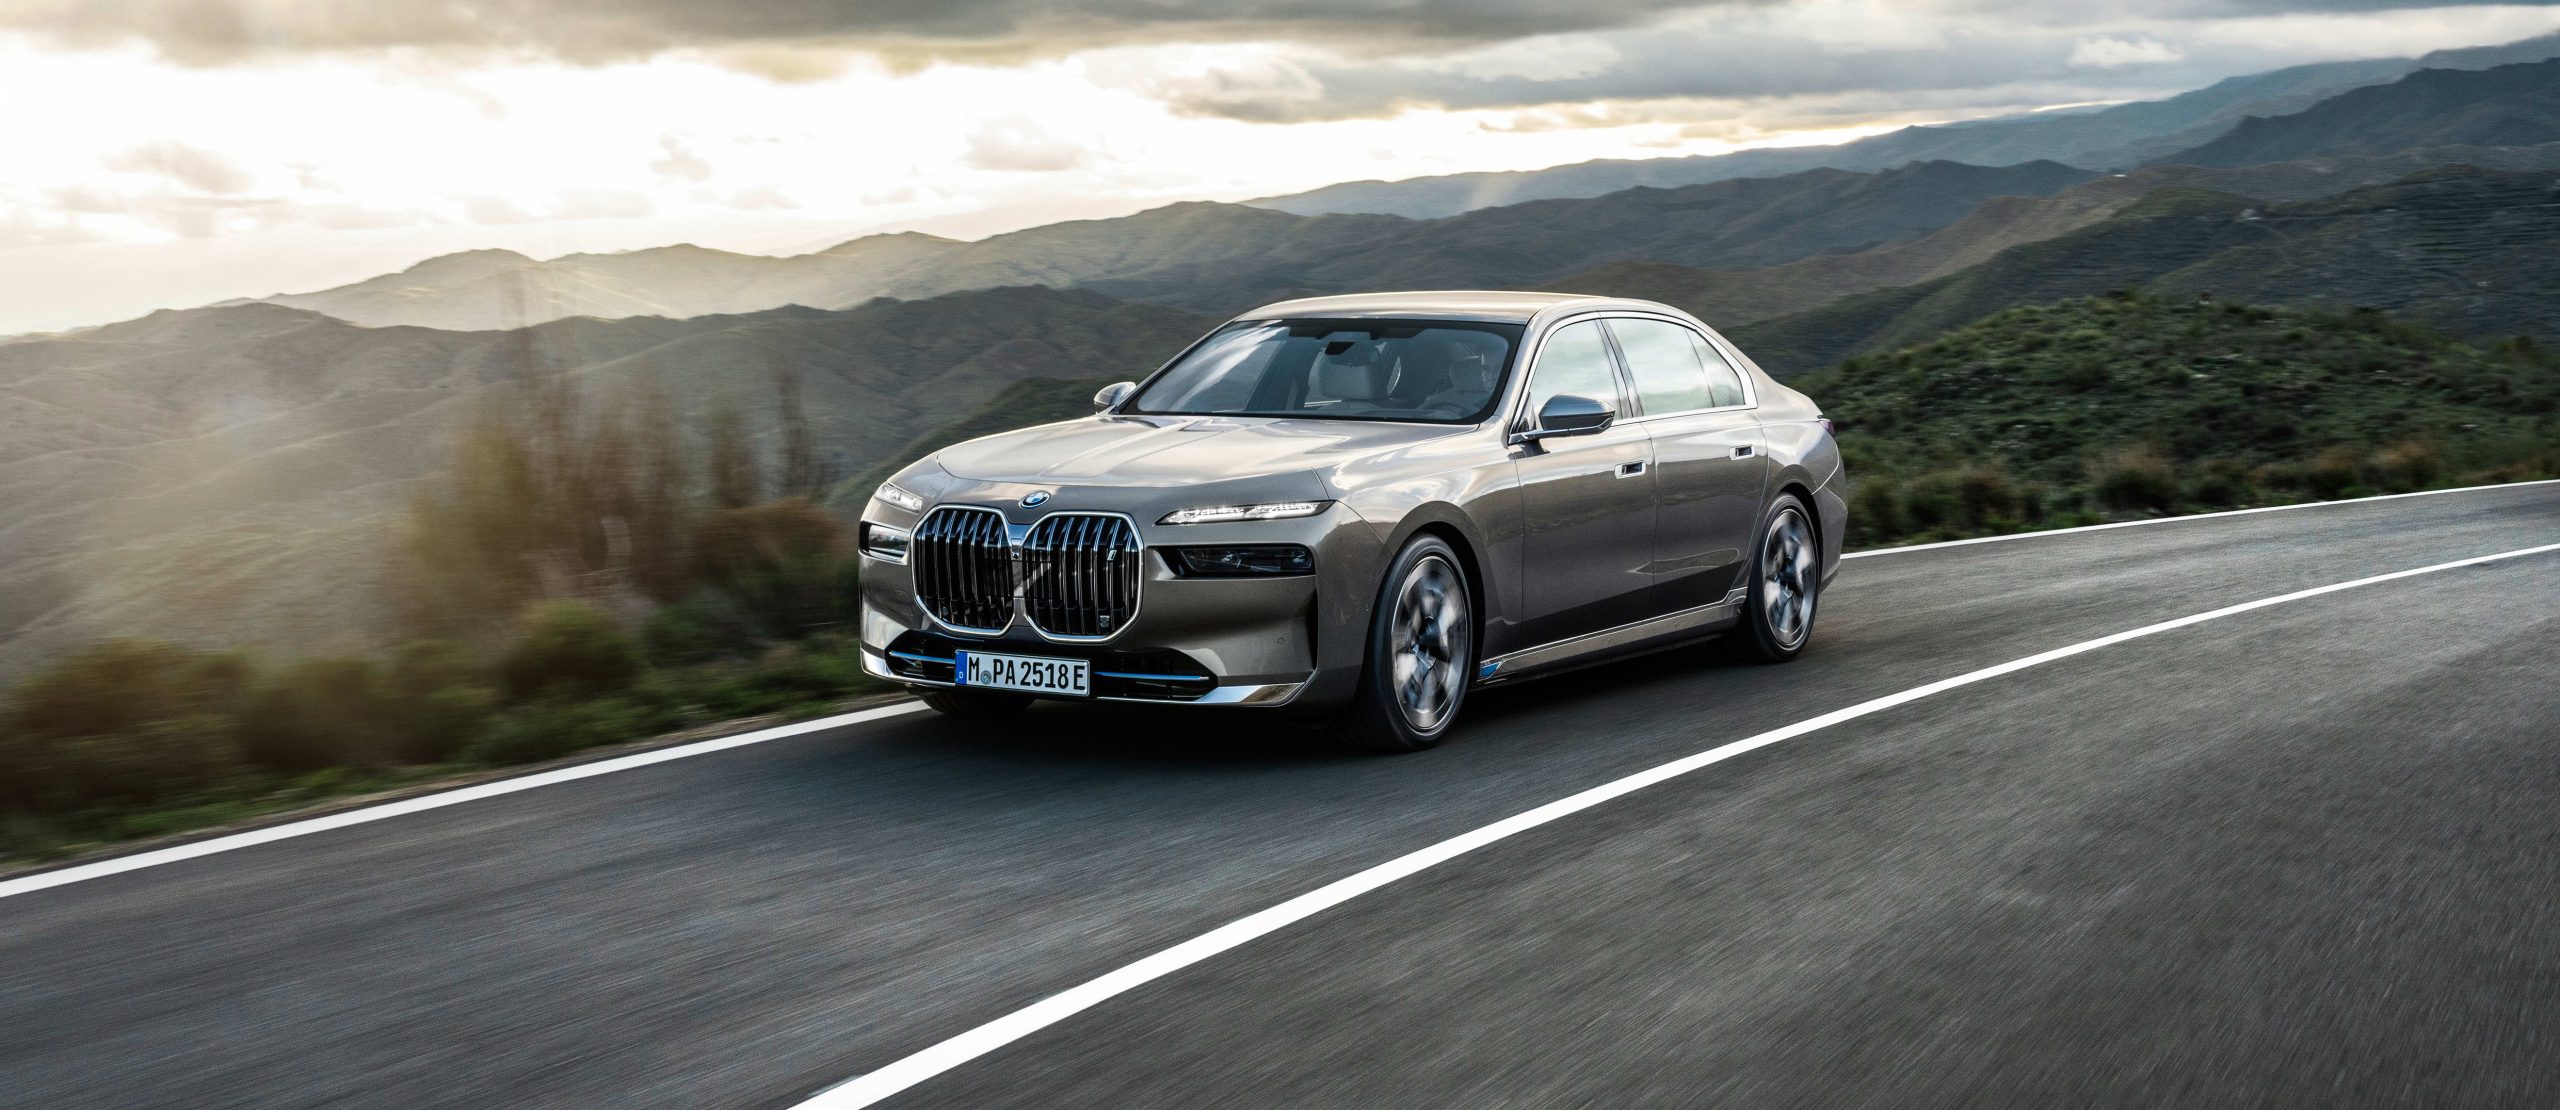 New BMW 7 Series Electric